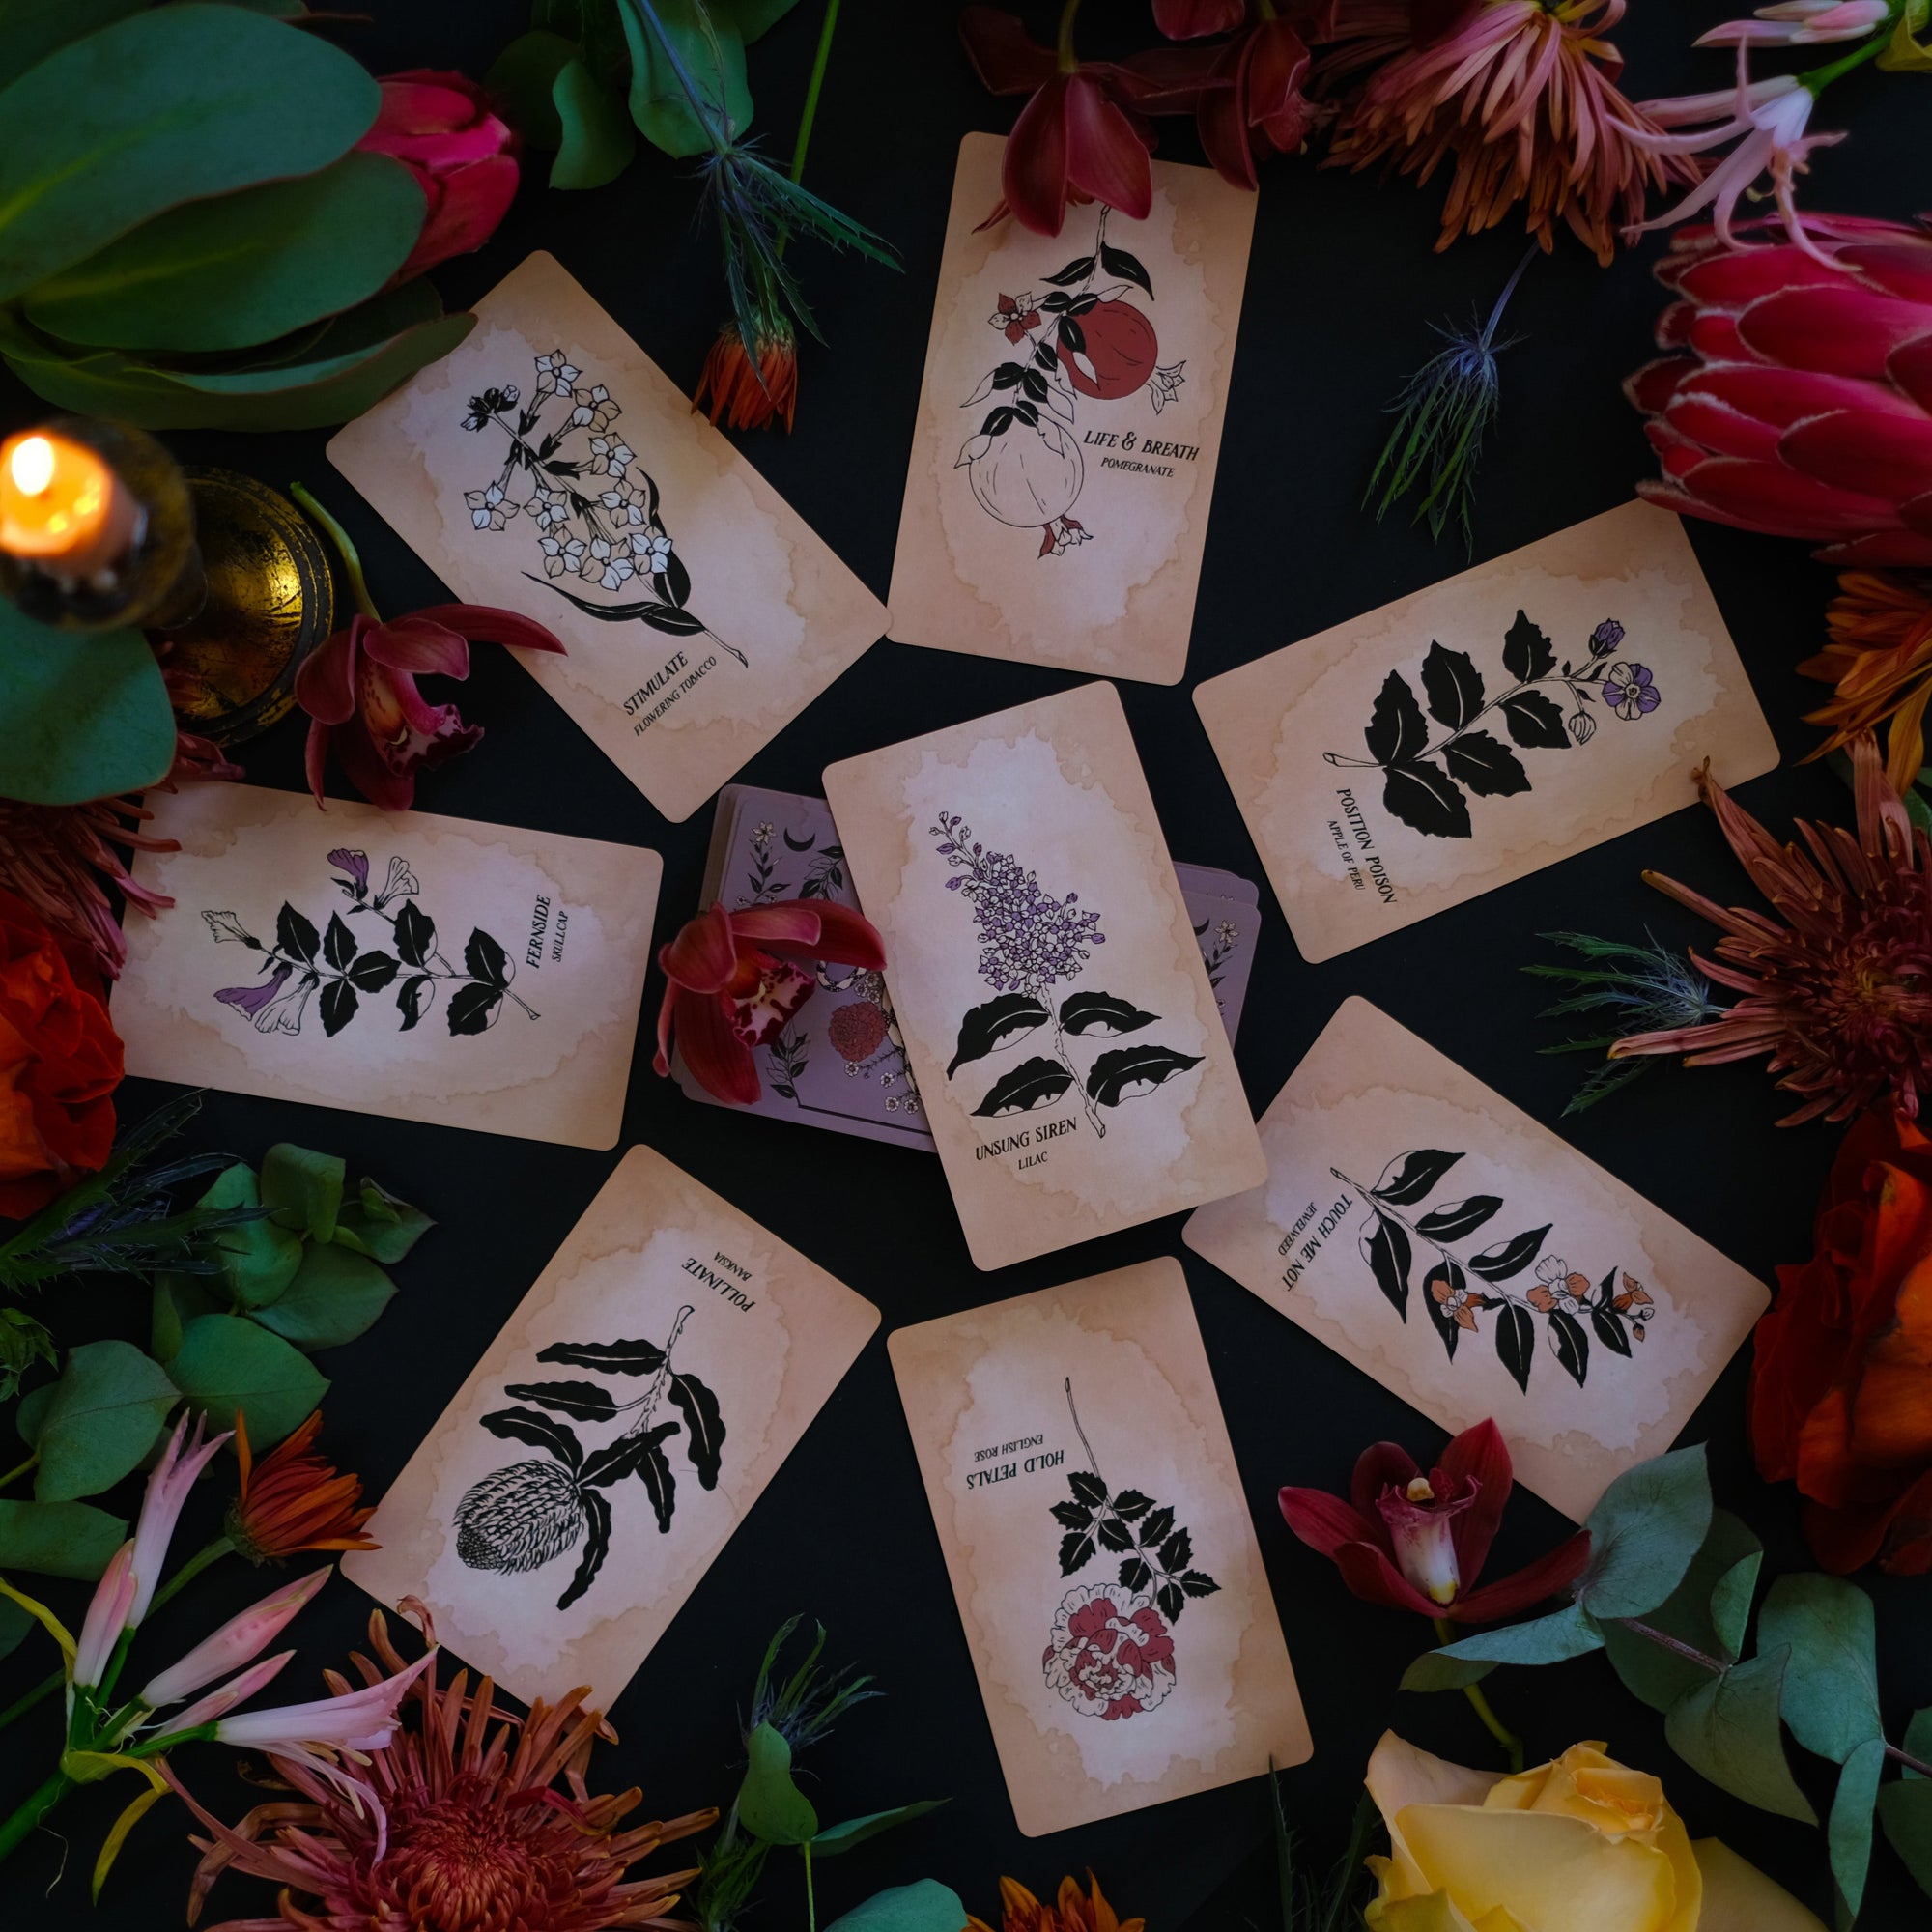 Pythia Botanica Oracle deck is illustrated by hand and rooted in plant magic, the natural world, and ancient mythology. Through 48 botanical oracle cards, we explore the plant world and all of the mystery, magic, wisdom and wonder it provides.